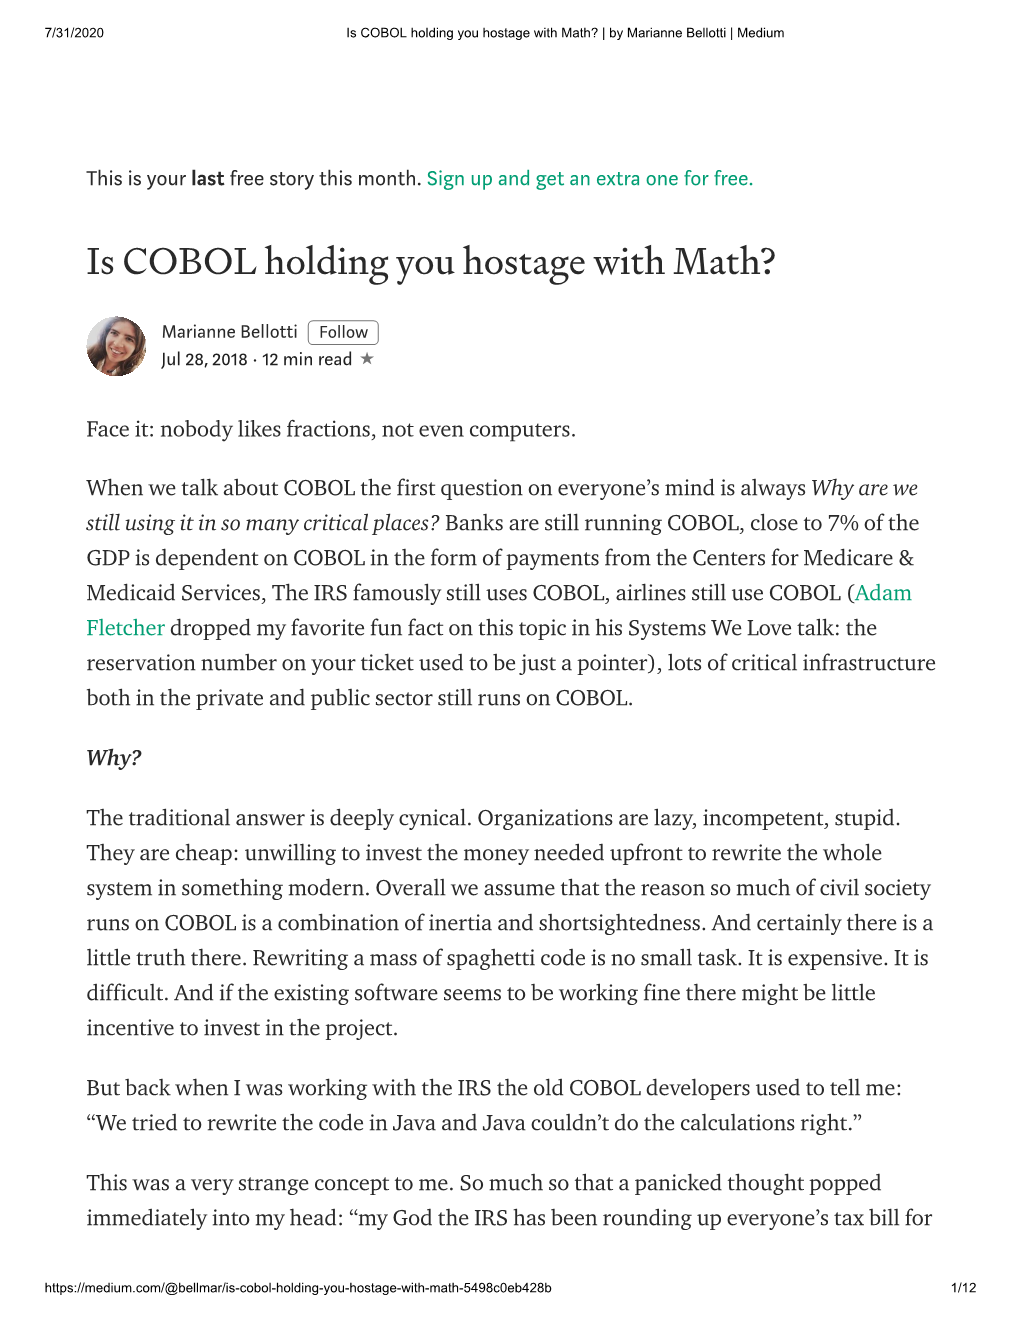 Is COBOL Holding You Hostage with Math? | by Marianne Bellotti | Medium